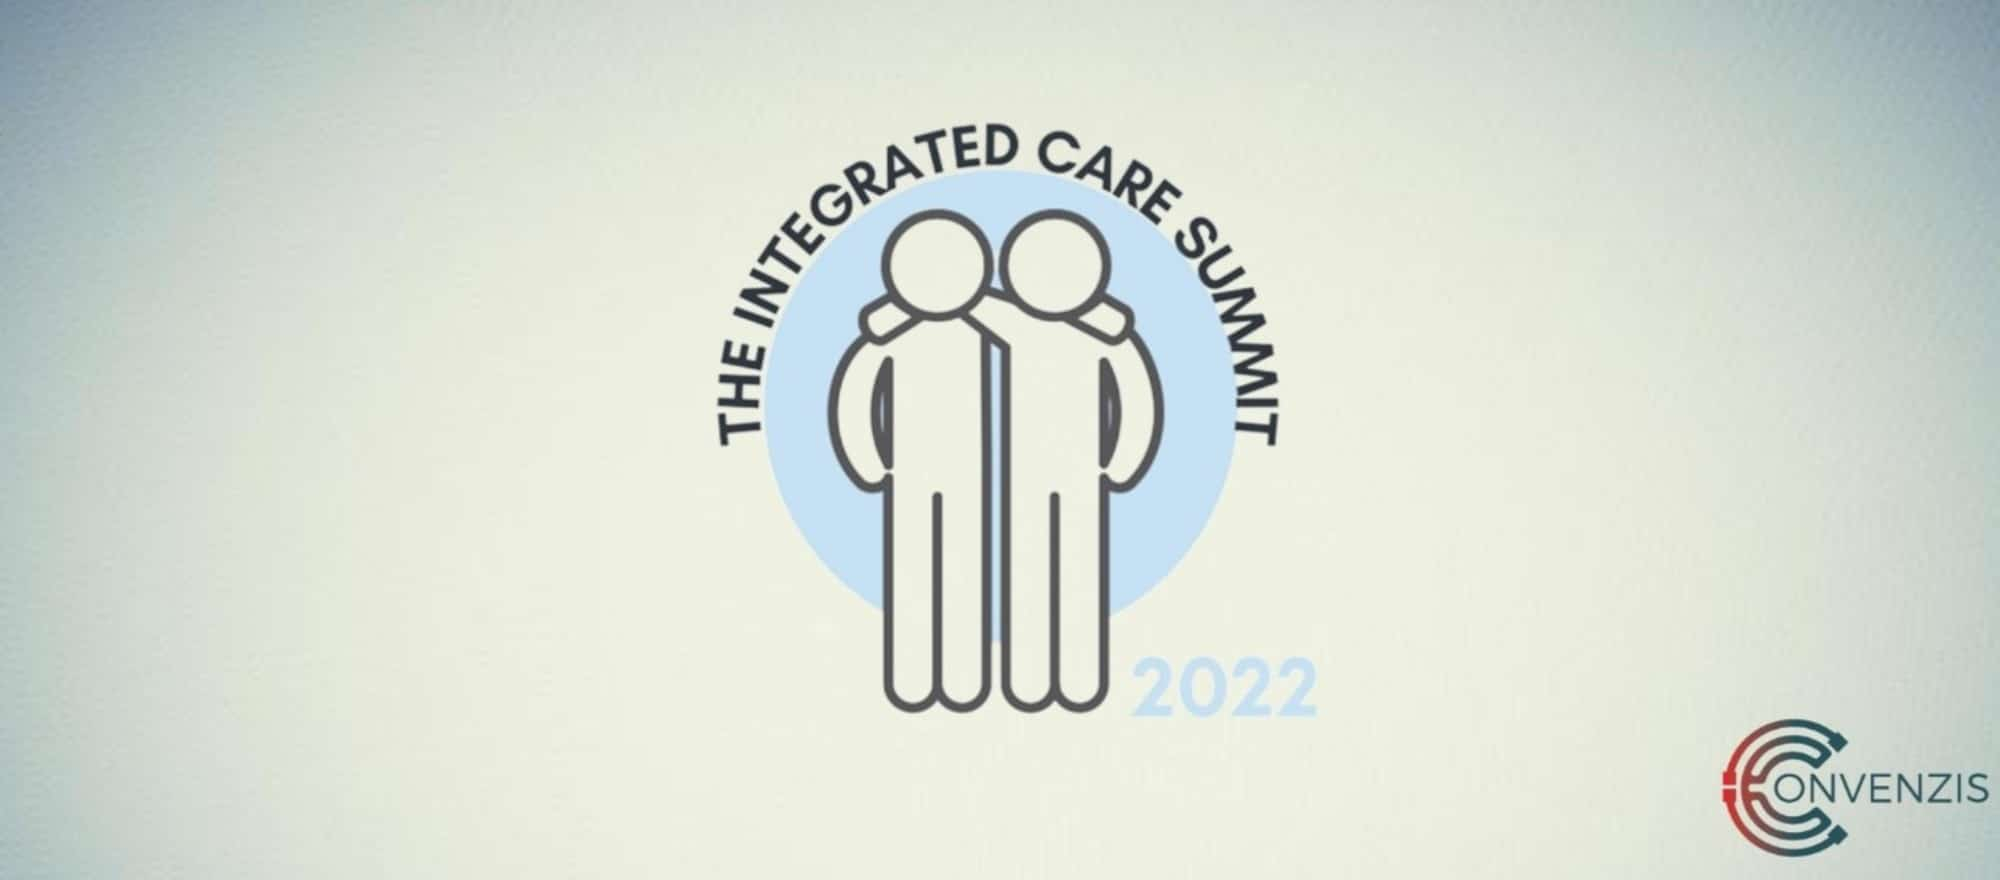 The Integrated Care Summit: Challenges and Best Practice